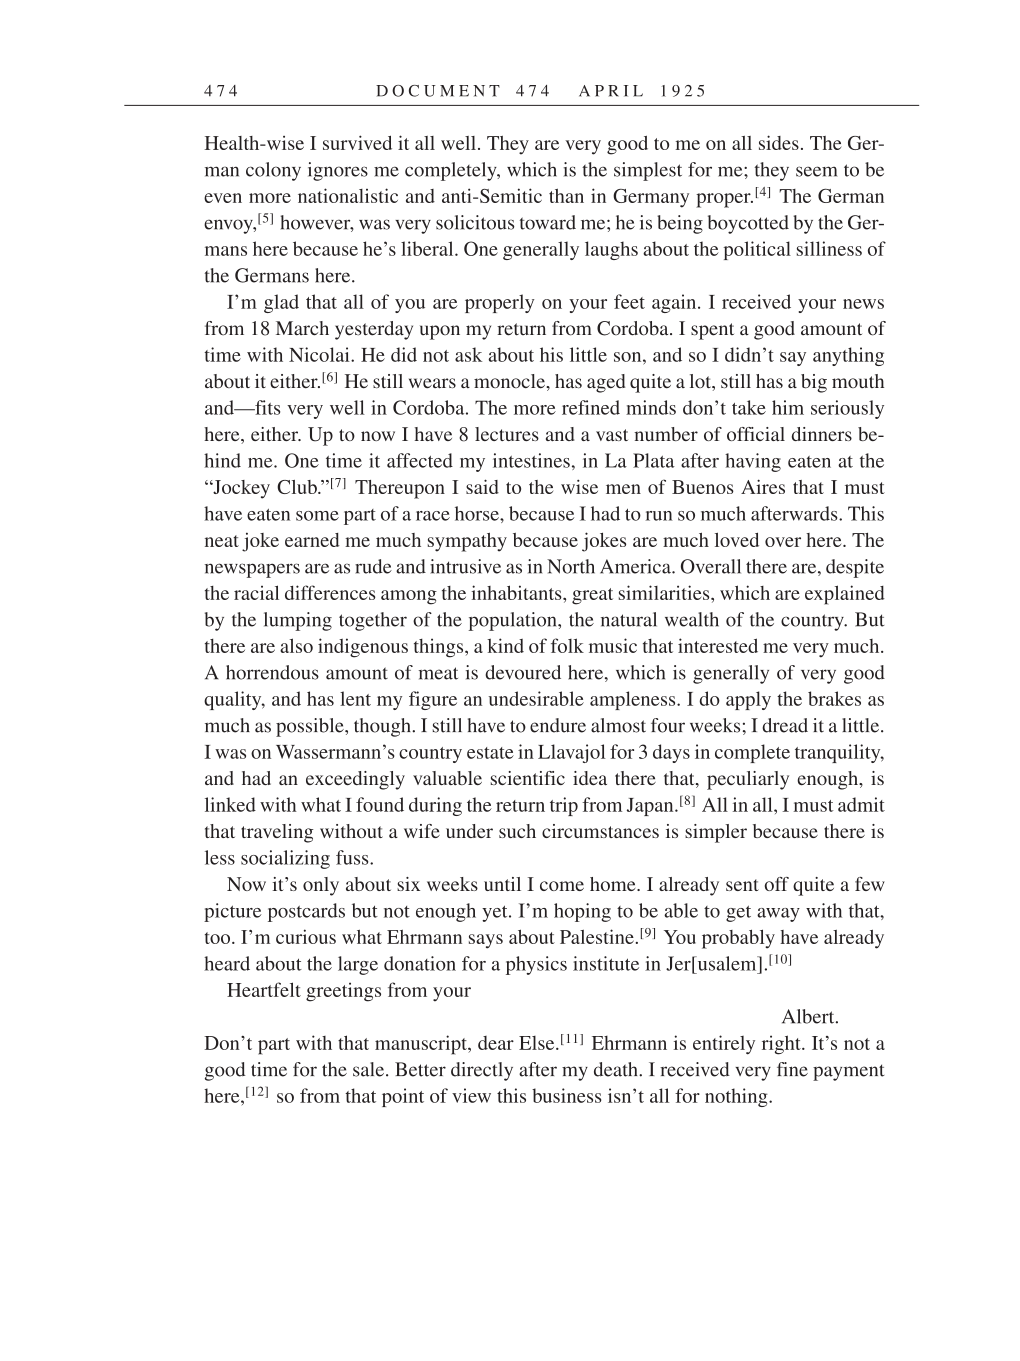 Volume 14: The Berlin Years: Writings & Correspondence, April 1923-May 1925 (English Translation Supplement) page 474